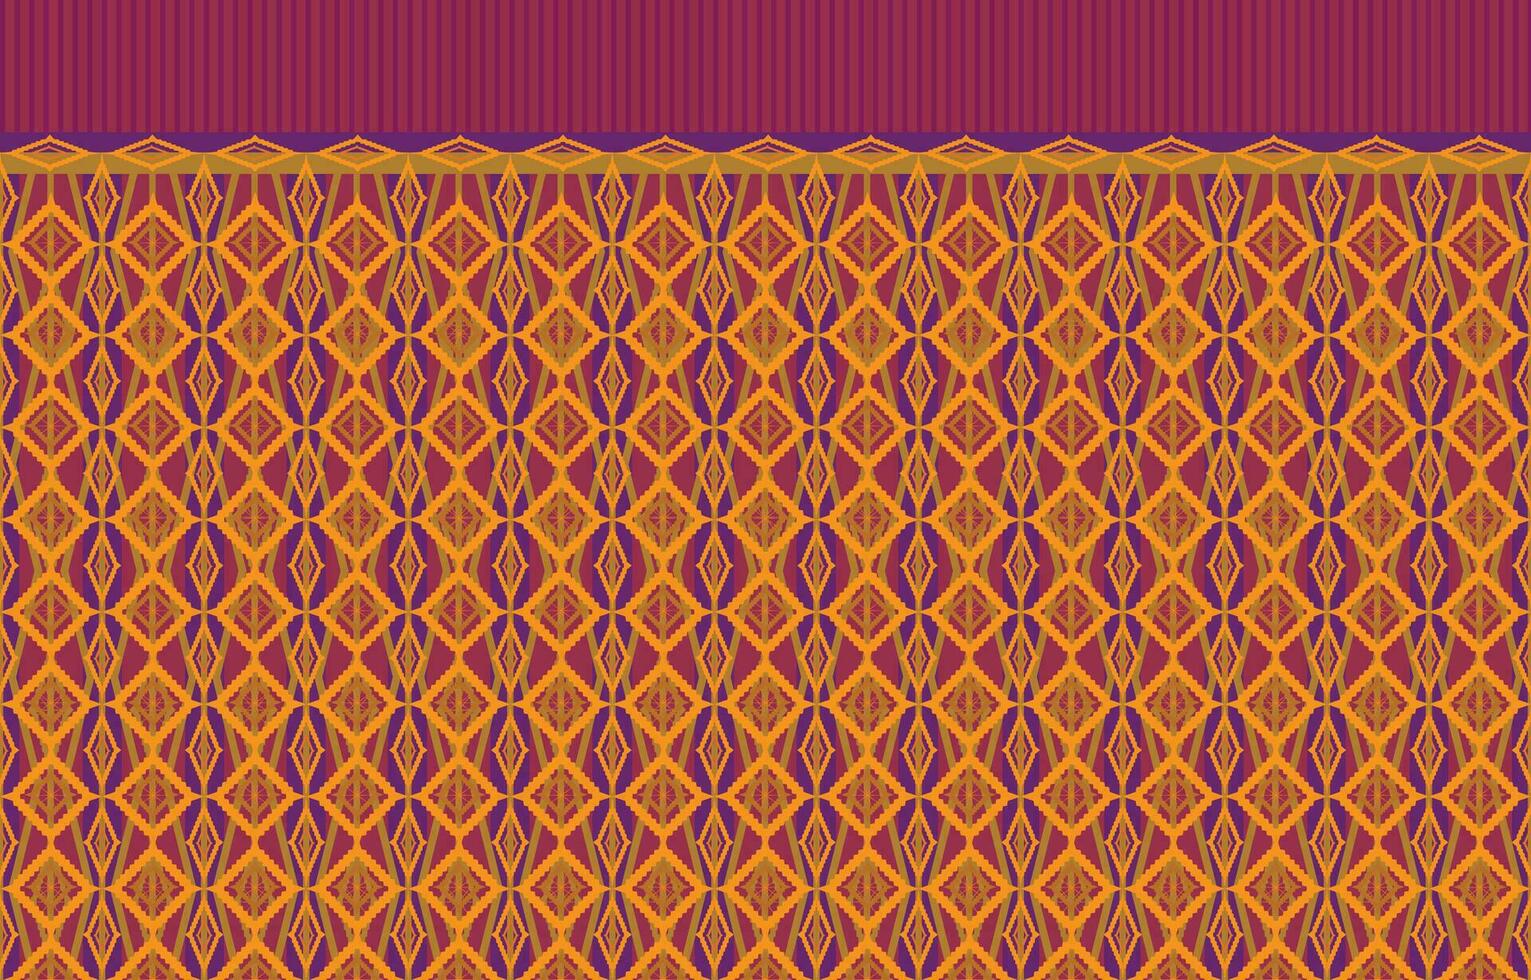 Beautiful Thai knitted embroidery.geometric ethnic oriental pattern traditional background. vector